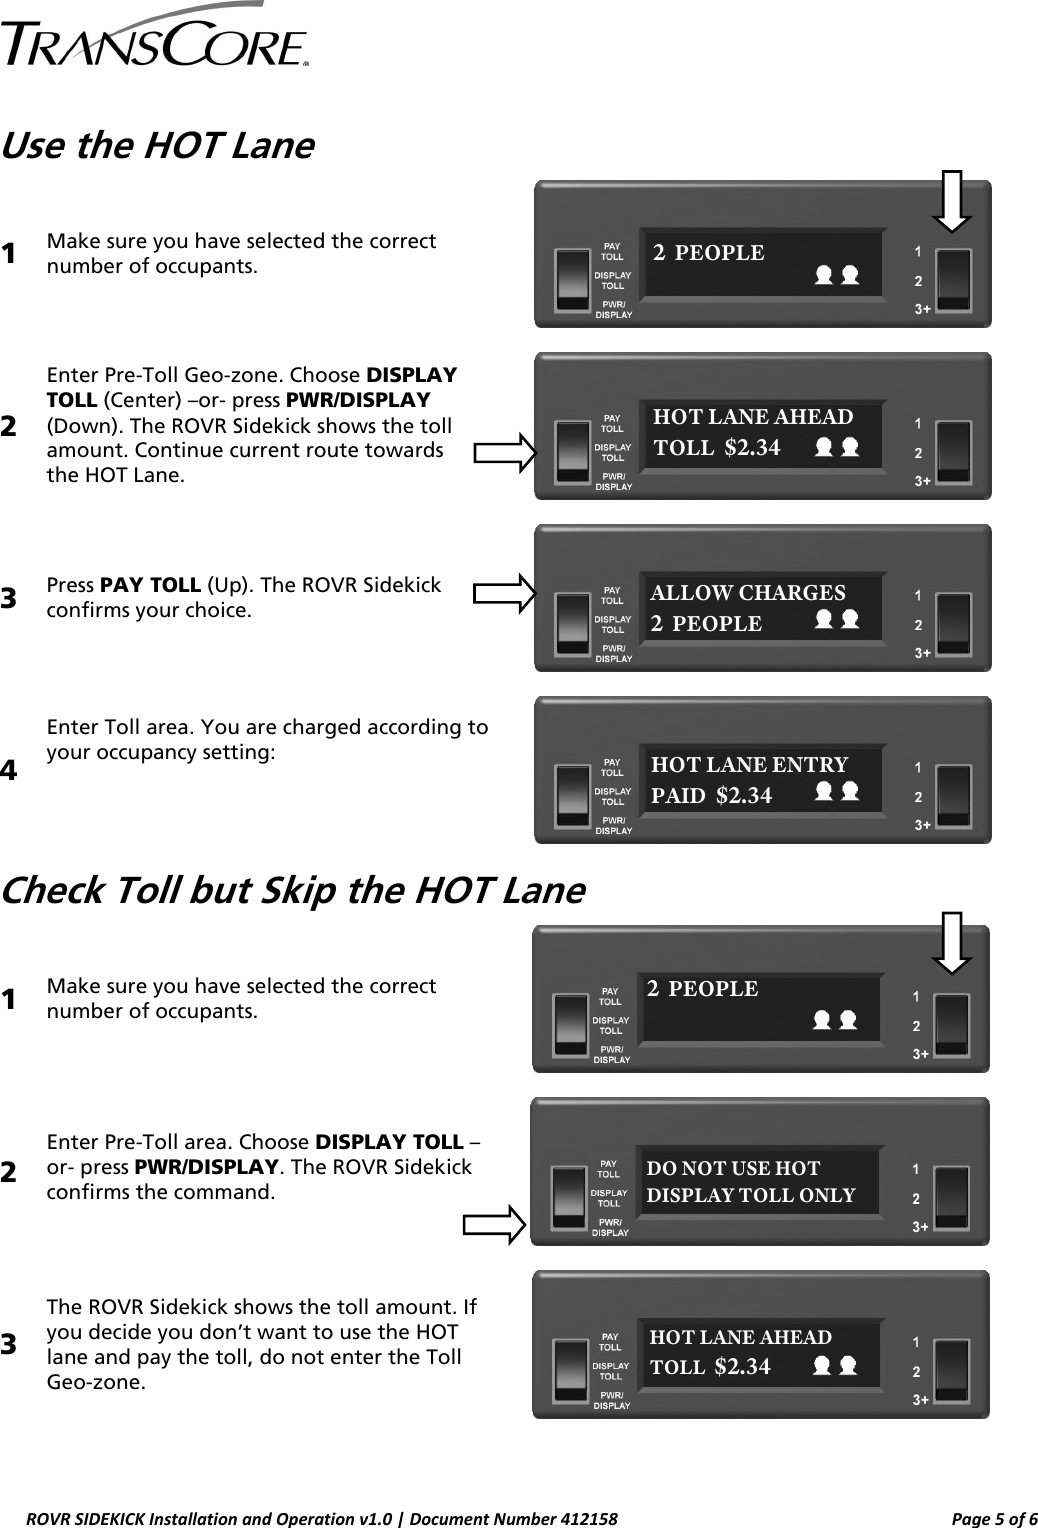  ROVR SIDEKICK Installation and Operation v1.0 | Document Number 412158  Page 5 of 6  Use the HOT Lane 1  Make sure you have selected the correct number of occupants.  2 Enter Pre-Toll Geo-zone. Choose DISPLAY TOLL (Center) –or- press PWR/DISPLAY (Down). The ROVR Sidekick shows the toll amount. Continue current route towards  the HOT Lane.   3  Press PAY TOLL (Up). The ROVR Sidekick confirms your choice.  4 Enter Toll area. You are charged according to your occupancy setting:    Check Toll but Skip the HOT Lane 1  Make sure you have selected the correct number of occupants.  2  Enter Pre-Toll area. Choose DISPLAY TOLL –or- press PWR/DISPLAY. The ROVR Sidekick confirms the command.  3 The ROVR Sidekick shows the toll amount. If you decide you don’t want to use the HOT lane and pay the toll, do not enter the Toll Geo-zone.   2  PEOPLE ALLOW CHARGES 2  PEOPLE HOT LANE AHEAD TOLL  $2.34 HOT LANE ENTRY PAID  $2.34 2  PEOPLE HOT LANE AHEAD TOLL  $2.34 DO NOT USE HOT DISPLAY TOLL ONLY 